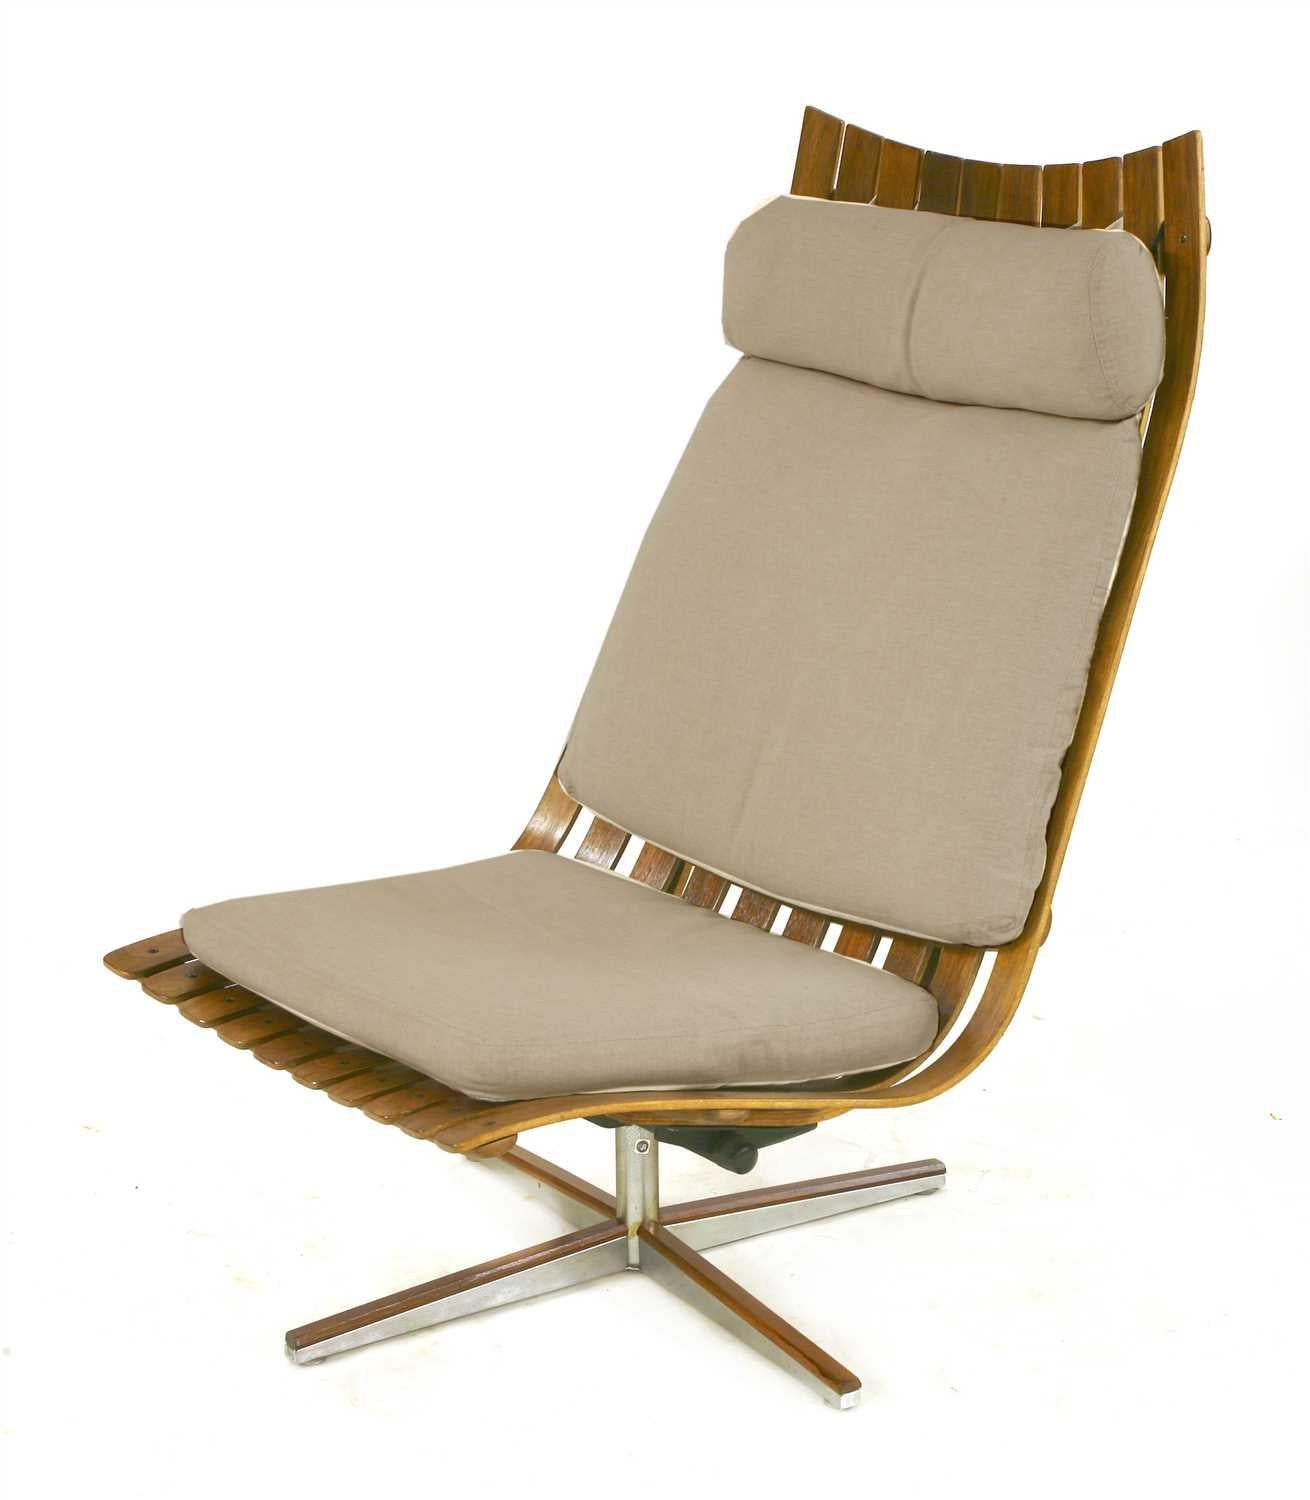 Hans Brattrud Scandia rosewood lounge chair by Georg Eknes, Norway, circa 1970

We are delighted to offer a Scandia Rio rosewood slatted lounge chair Norway circa 1970, designed by Hans Brattrud for Georg Eknes, on a revolving stand, labelled